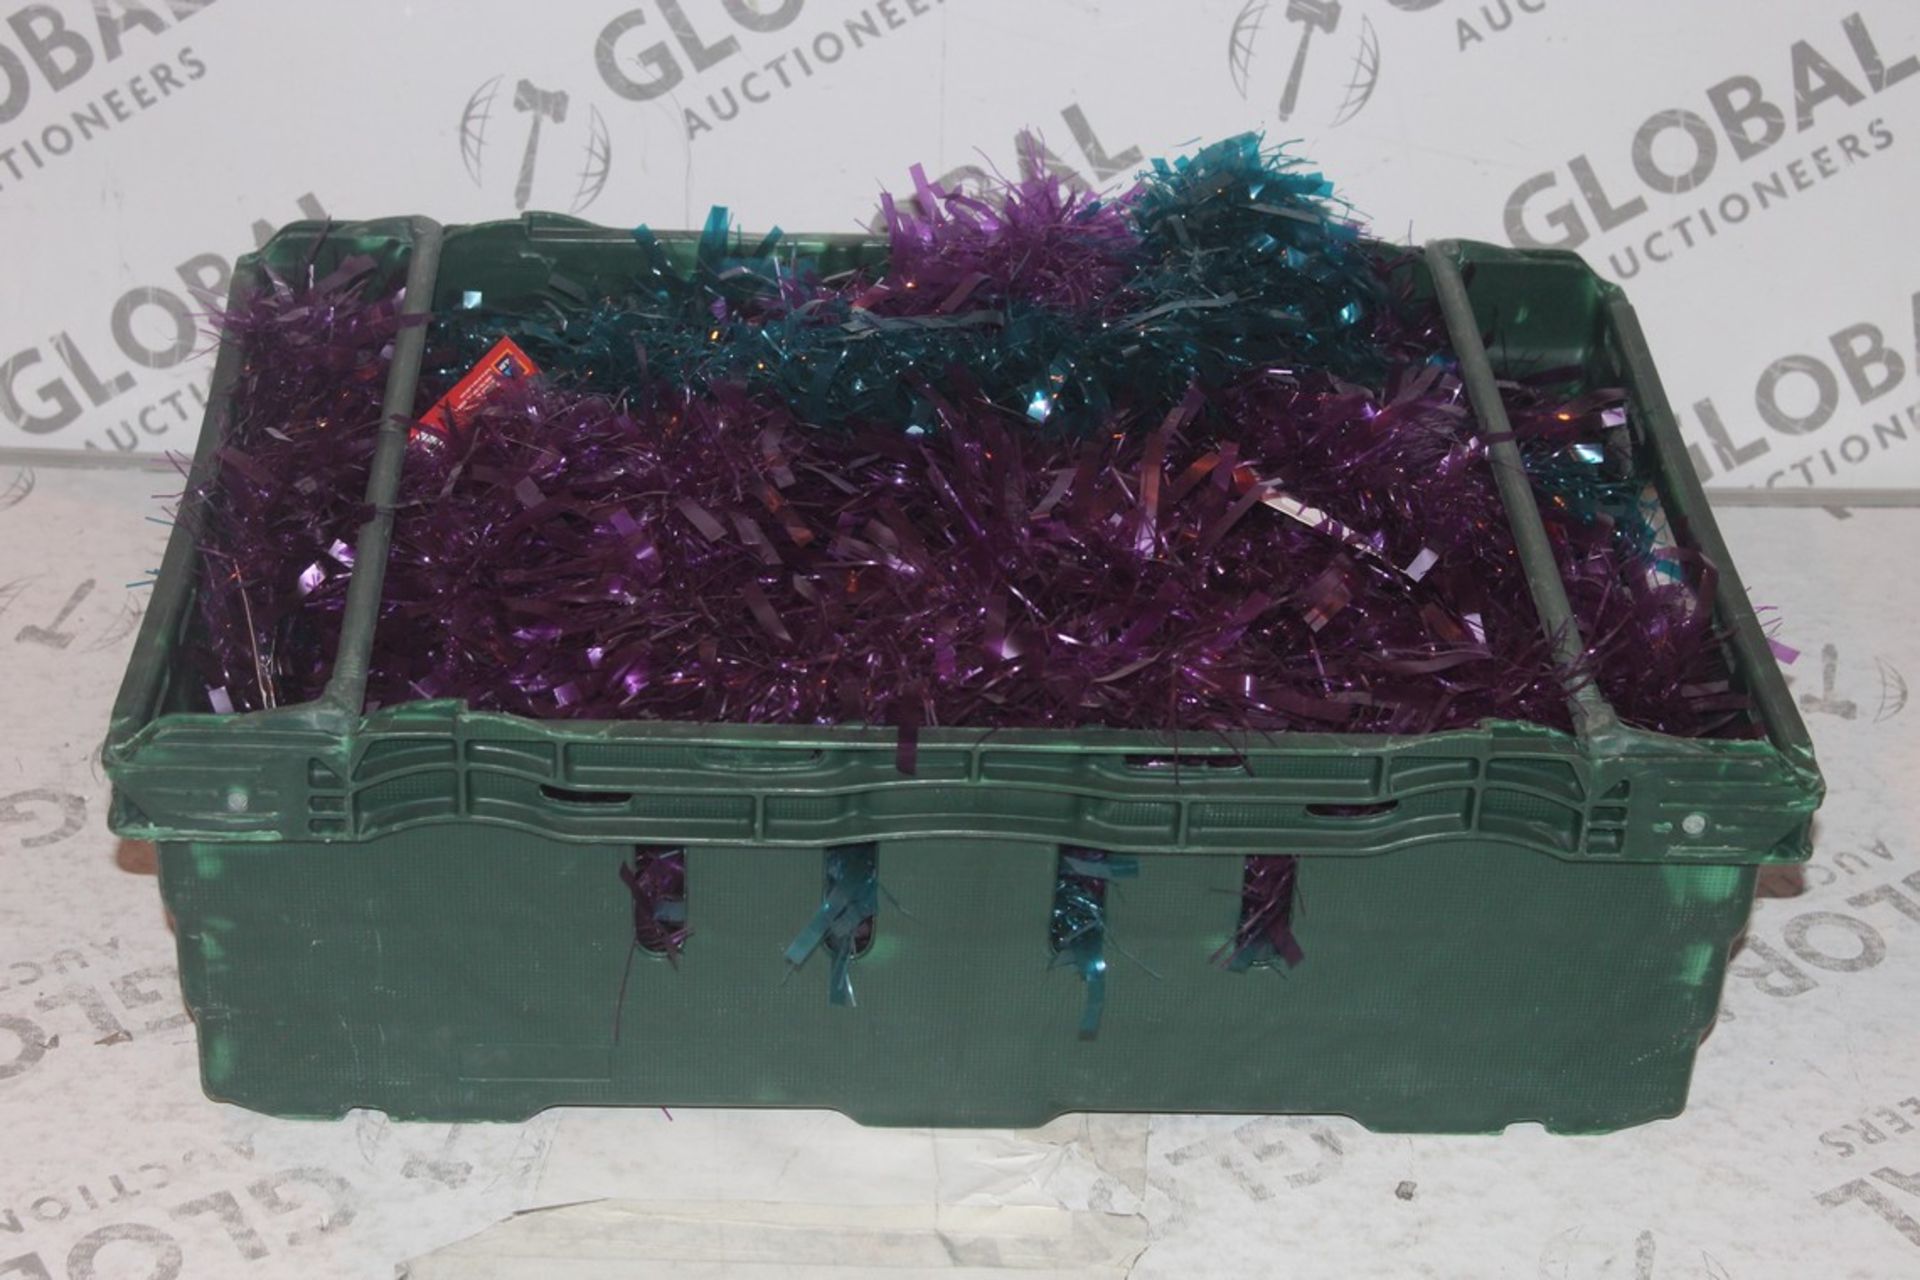 Lot to Contain 3 Boxes Each Containing a Large Amount of Festive Tinsel (Public Viewing and